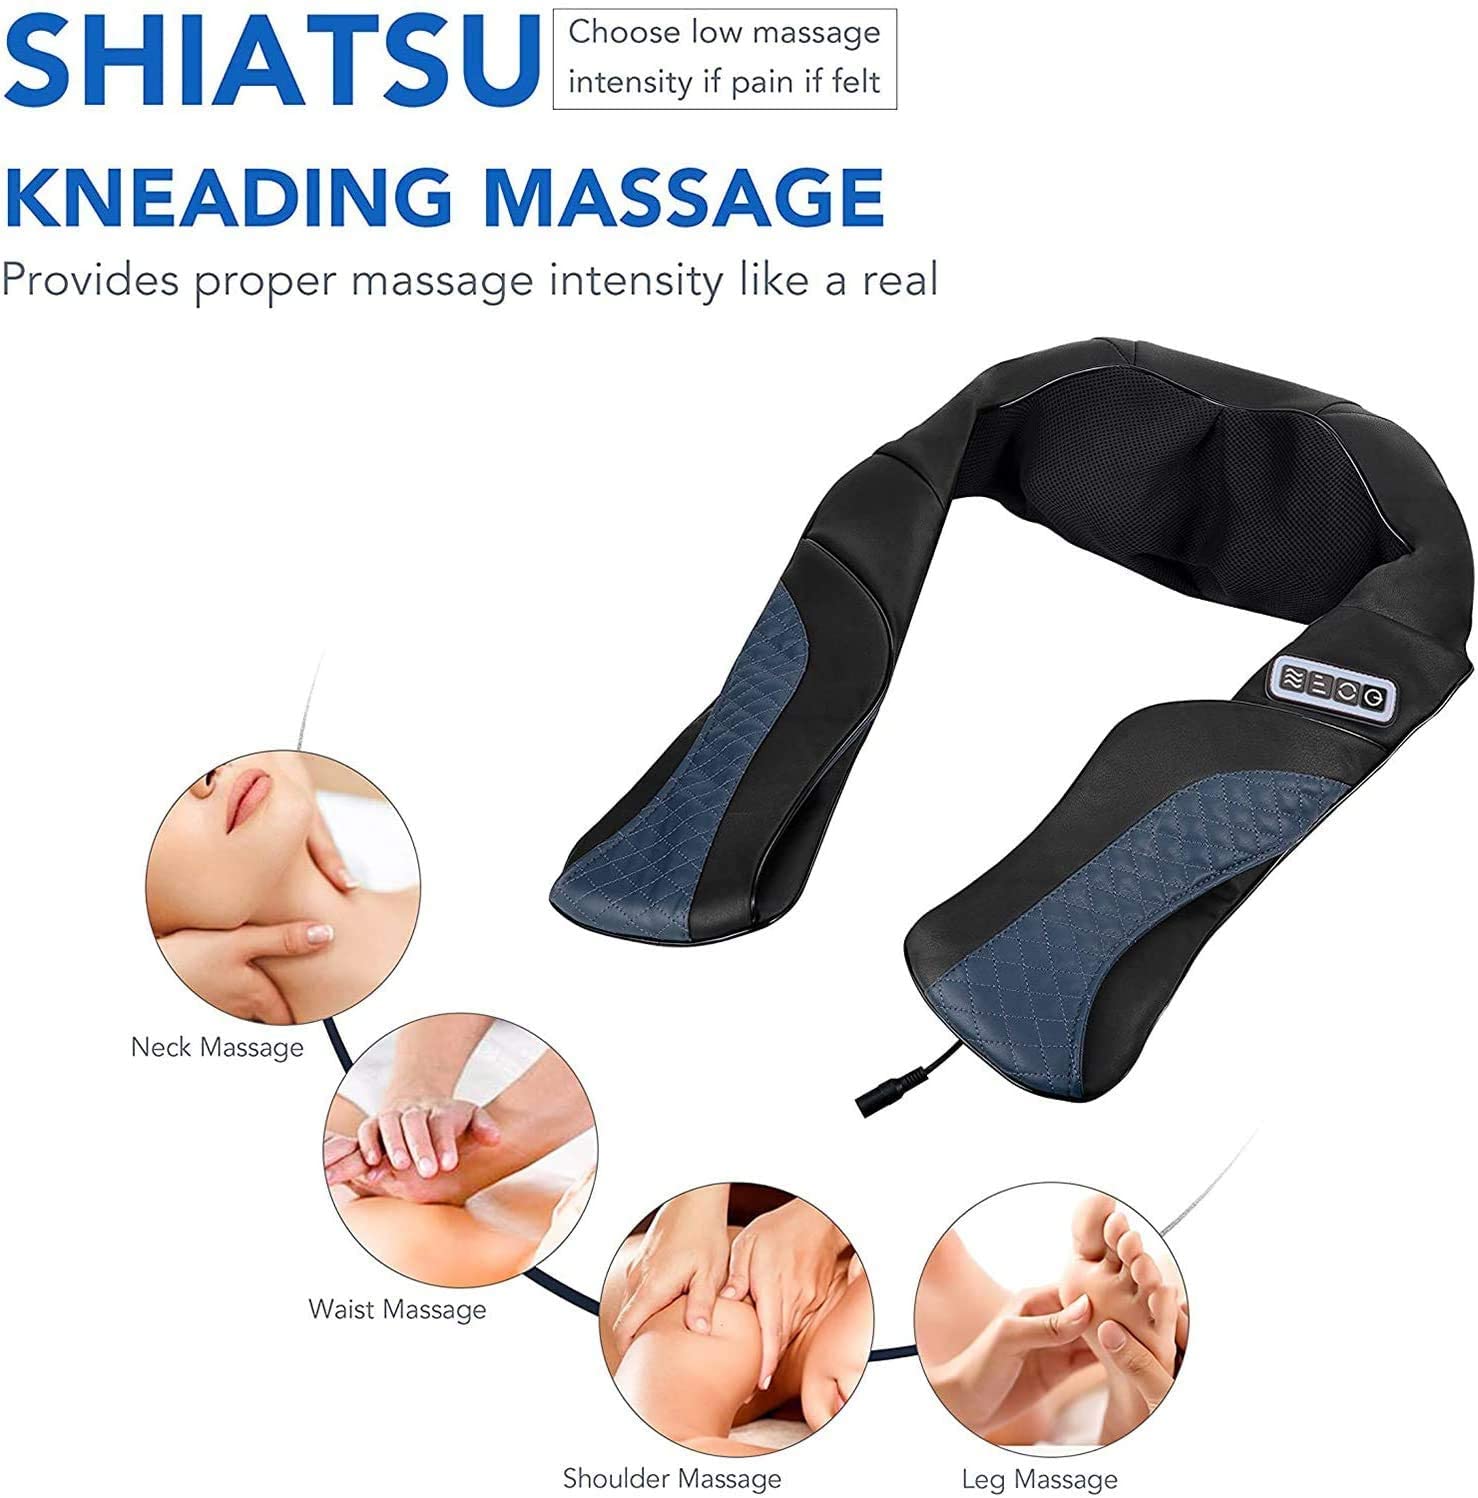 MaxKare Shiatsu shoulder massage with kneading and heatp - general for sale  - by owner - craigslist